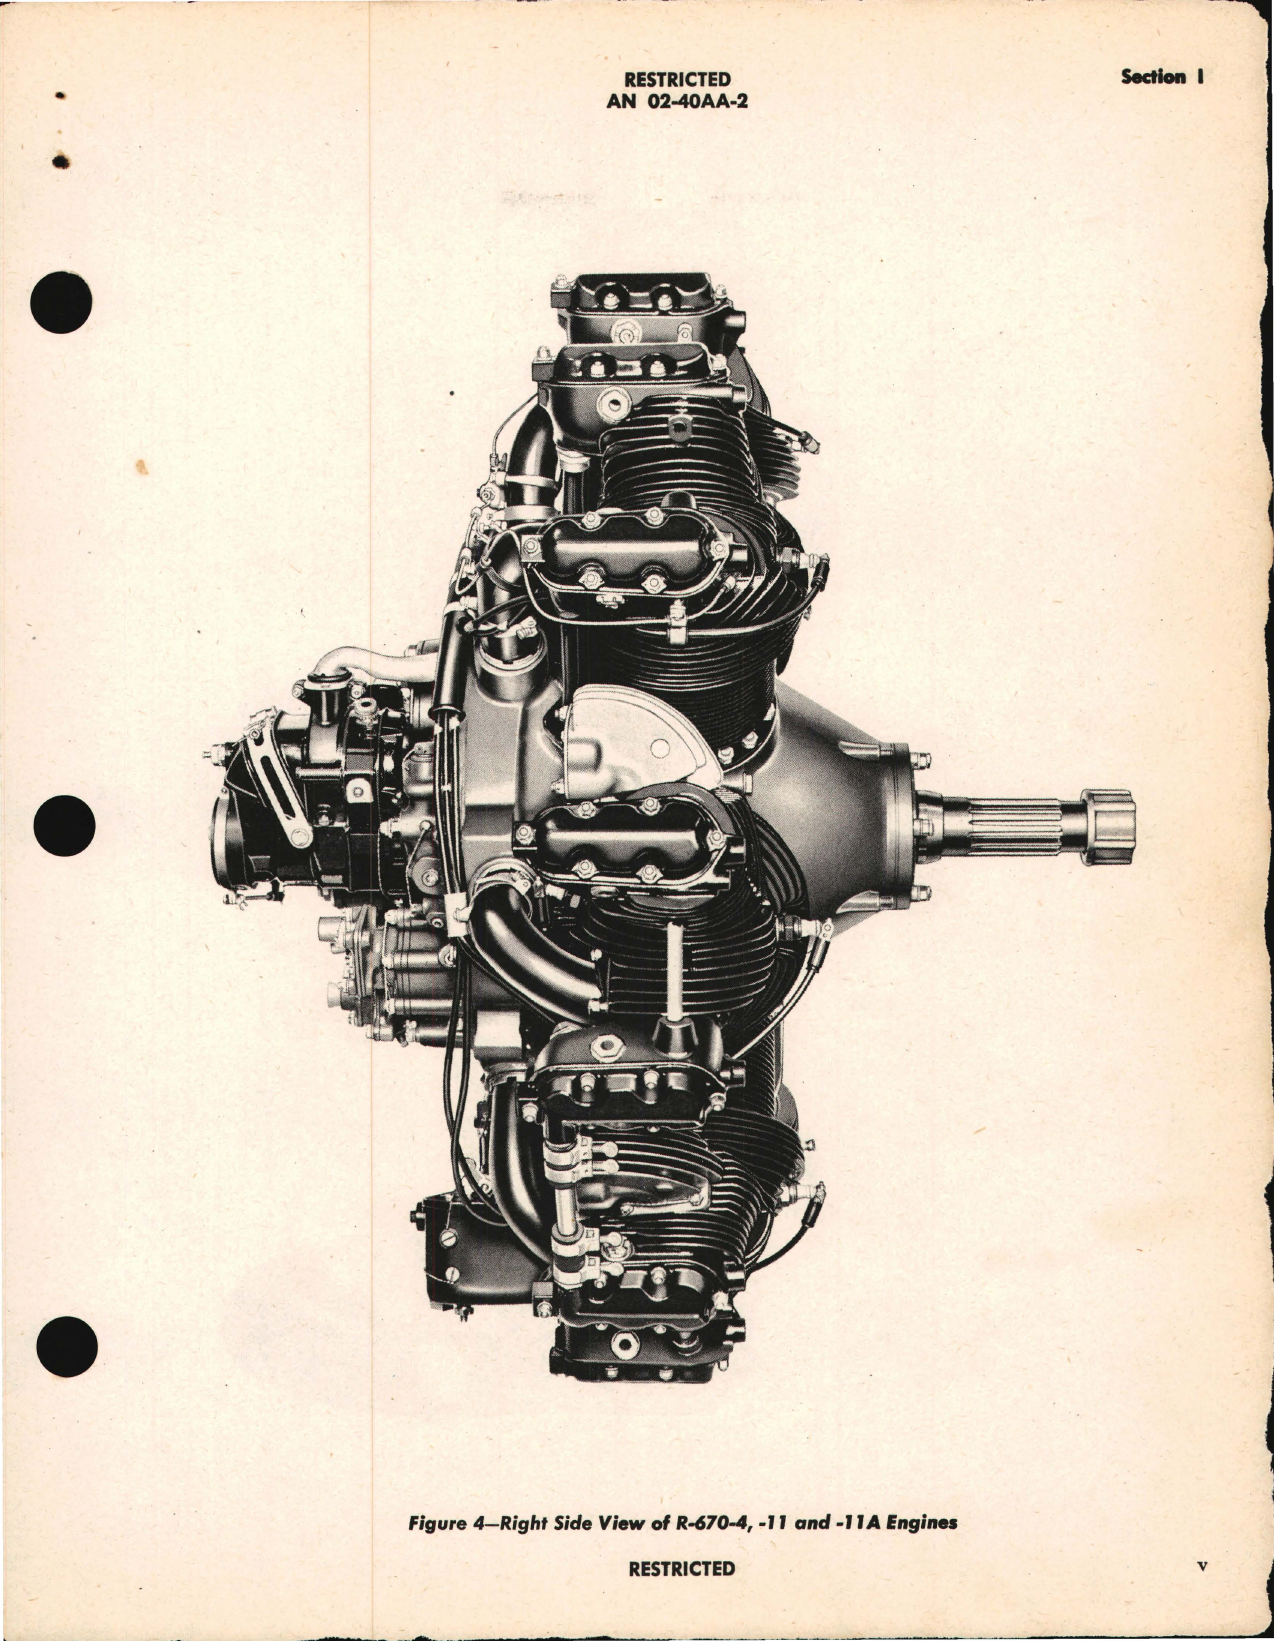 Sample page 7 from AirCorps Library document: Service Instructions for Aircraft Engines R-670-4, R-670-5, R-670-6, R-670-11, and R-670-11A